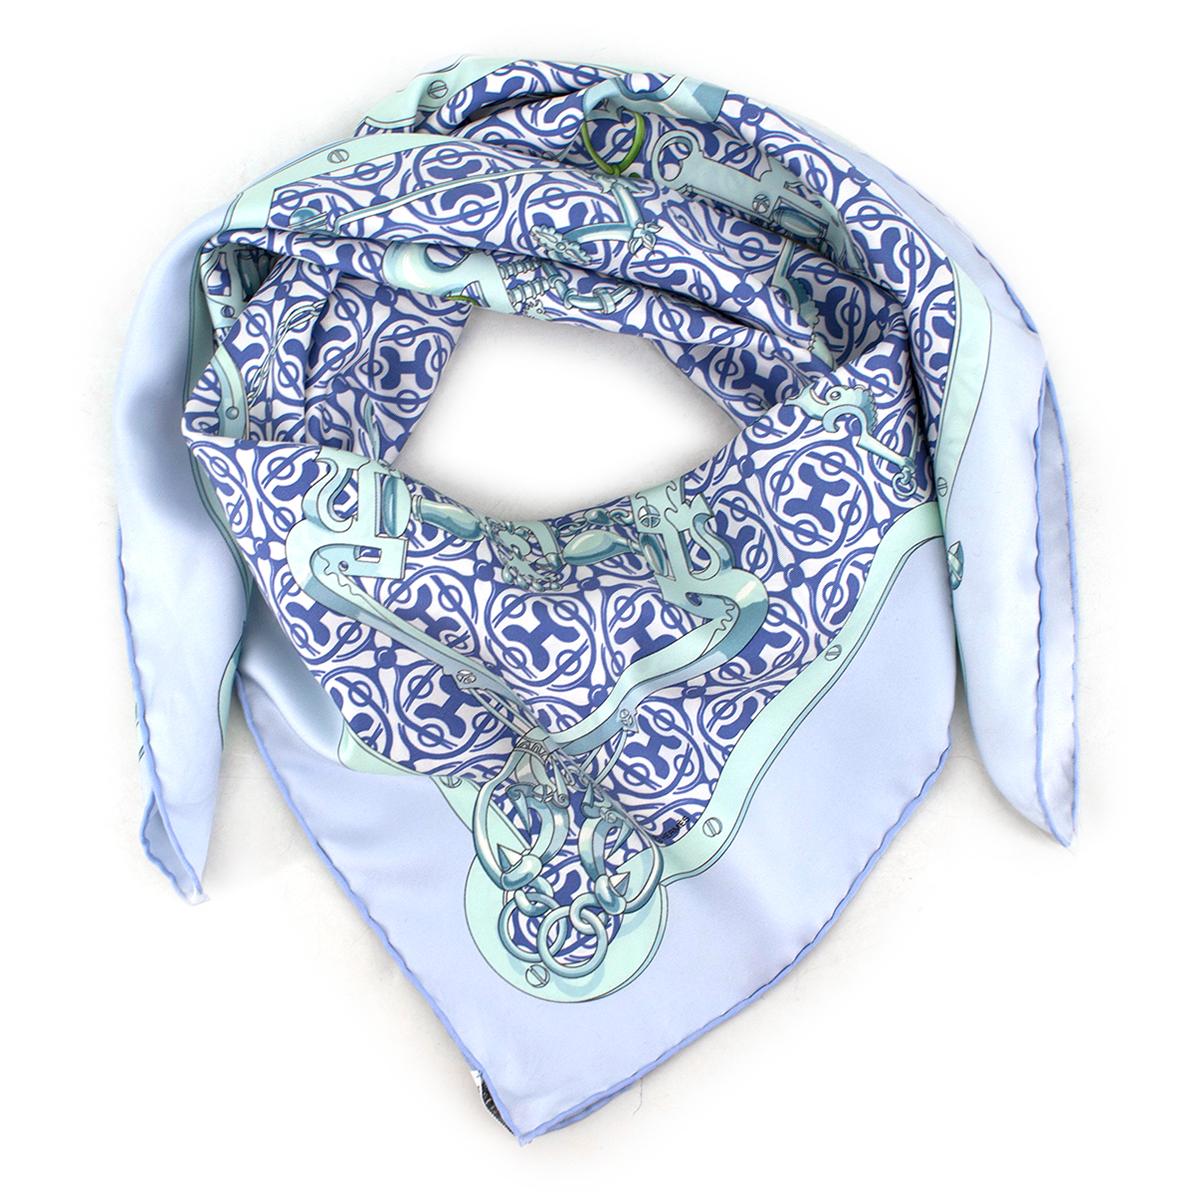 Hermes Limited Edition Mors & Gourmettes silk-twill scarf 

- Ice-blue, lightweight silk-twill
- Lavender-purple, mint-green and ivory Limited Edition print 
- Black Mors & Gourmettes centre print 
- Hand stitched rolled edges 

Please note, these